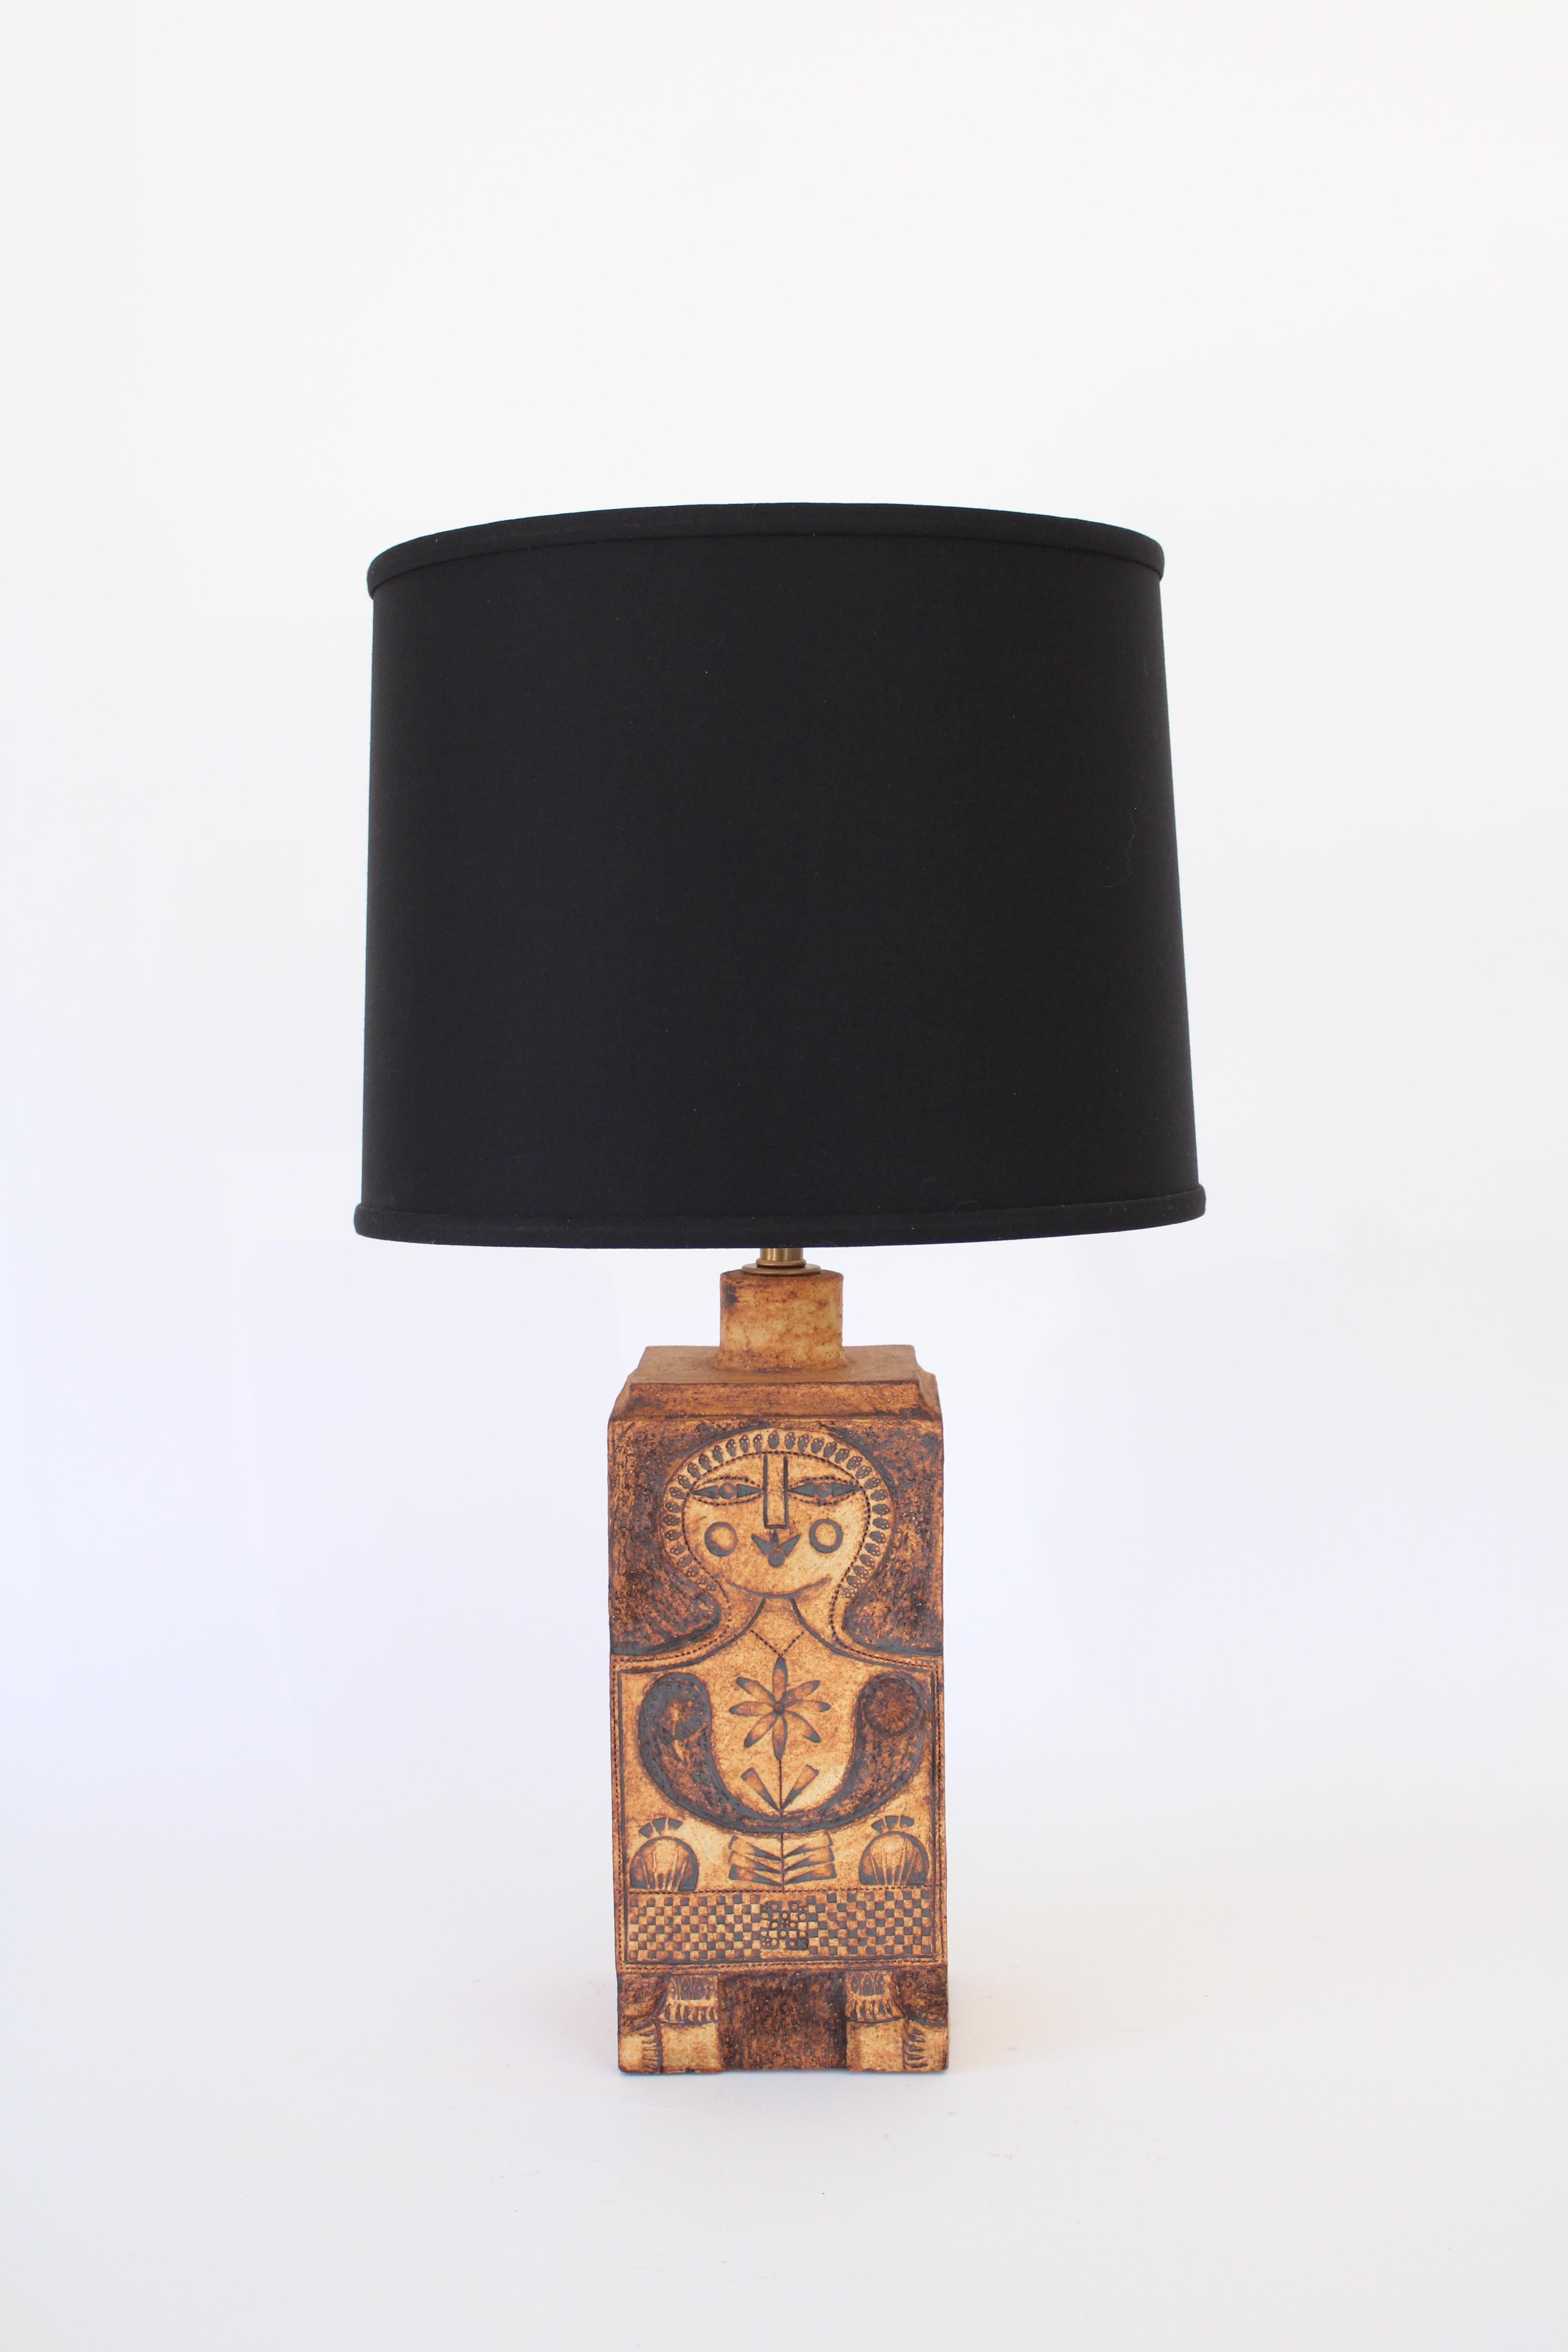 Mid-Century Modern Roger Capron French Ceramic Table Lamp, Image of Woman circa 1977 For Sale